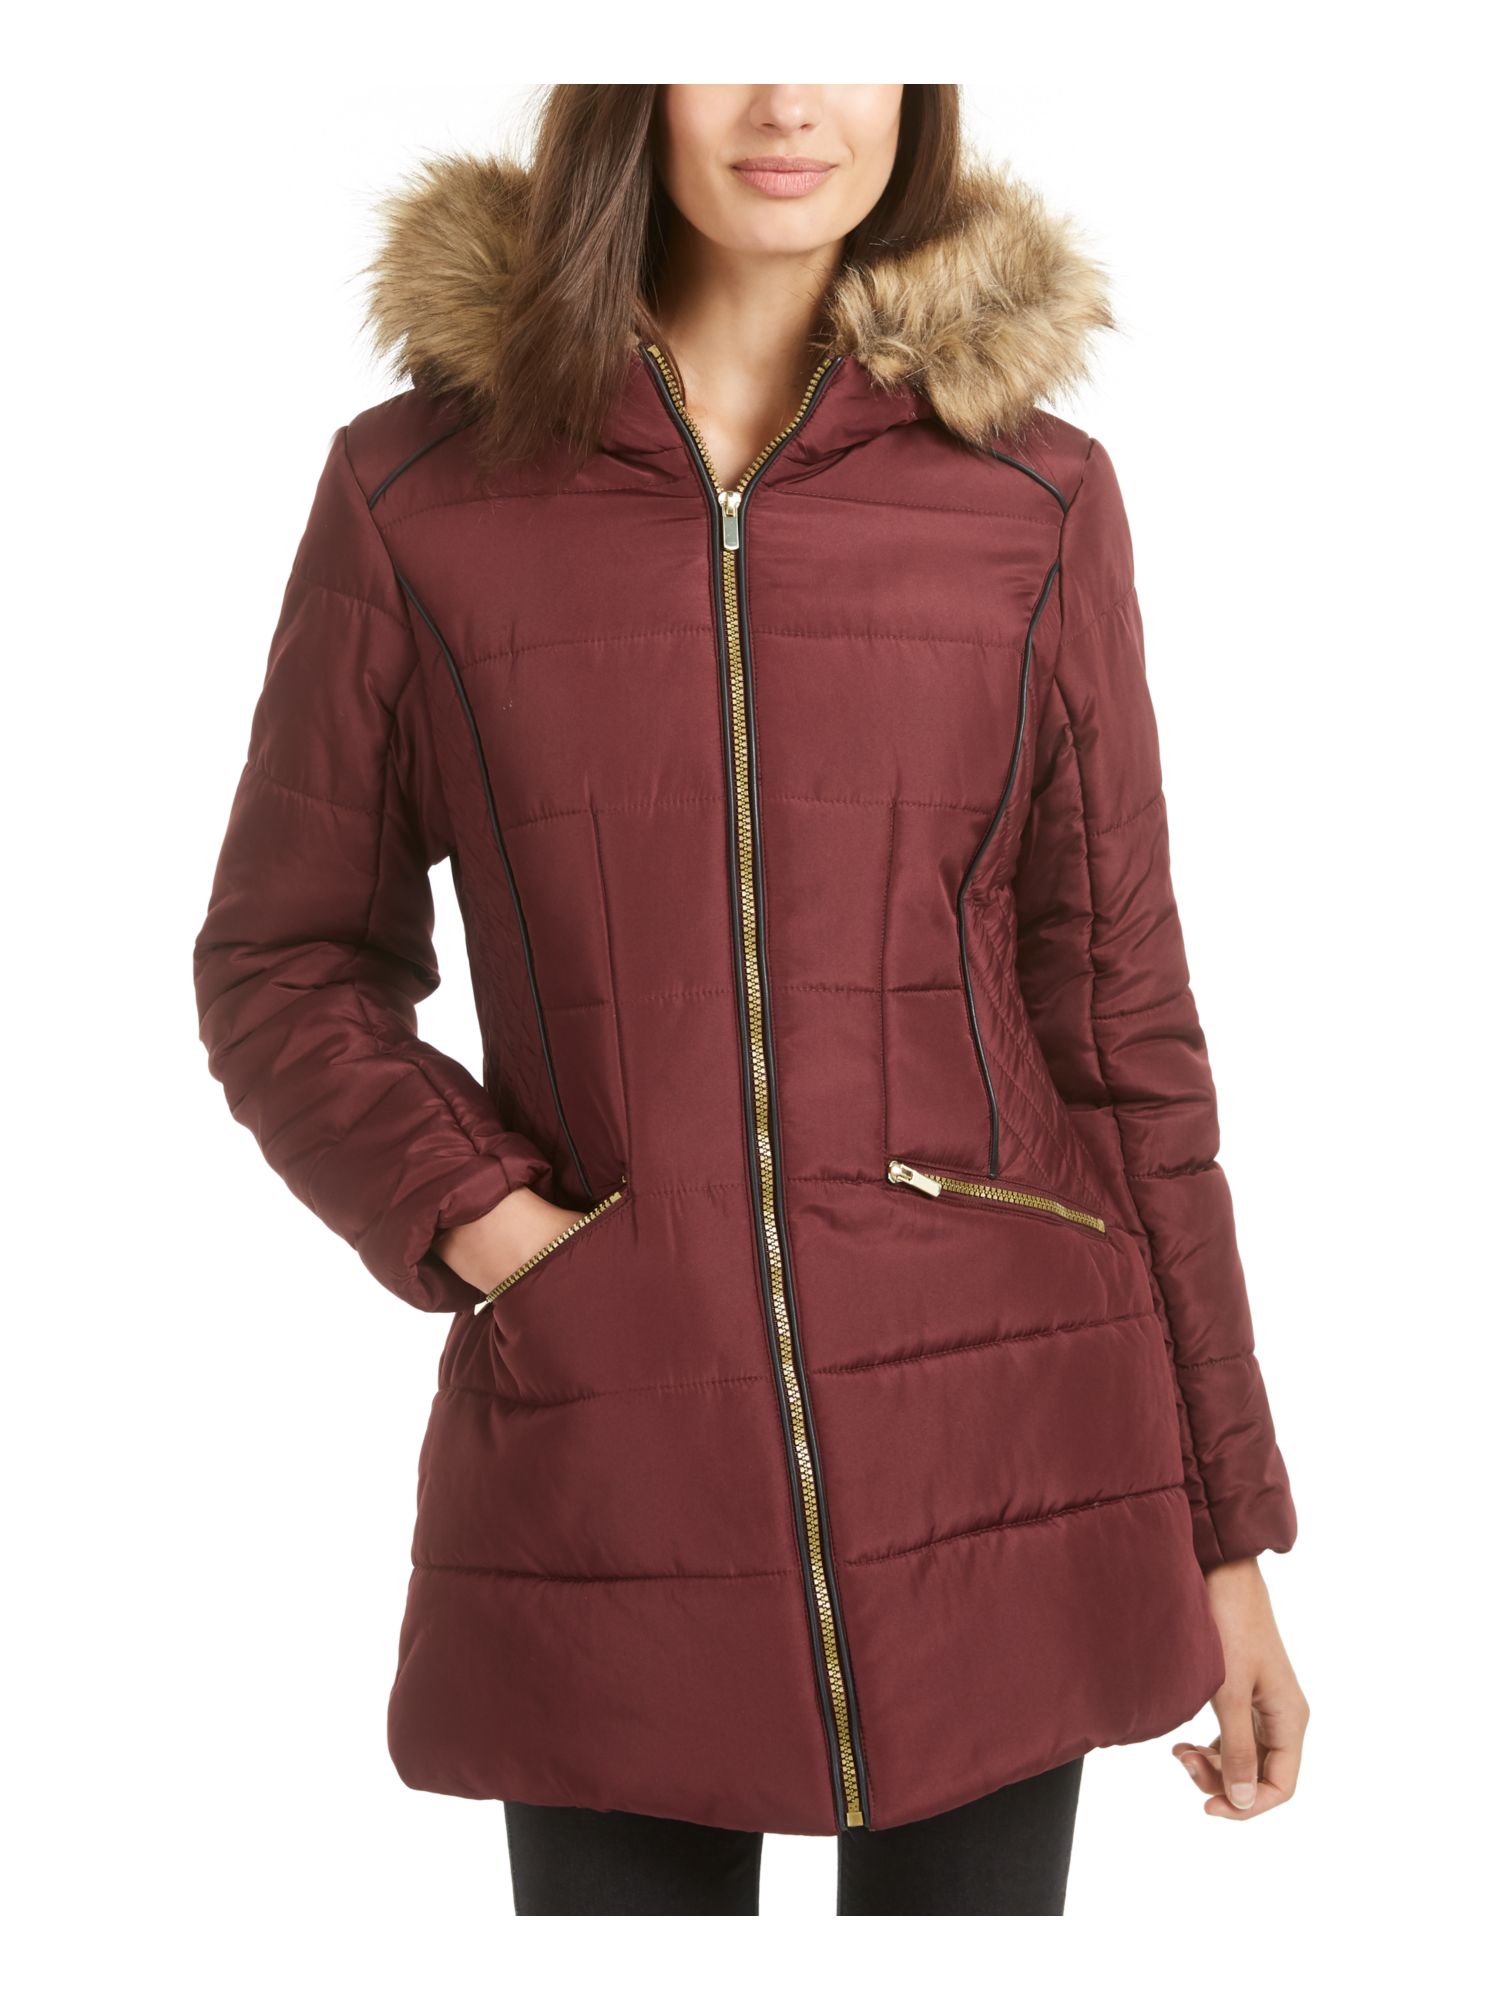 CELEBRITY PINK Womens Burgundy Faux Fur Pocketed Zippered Puffer Winter Jacket Coat S - image 1 of 3